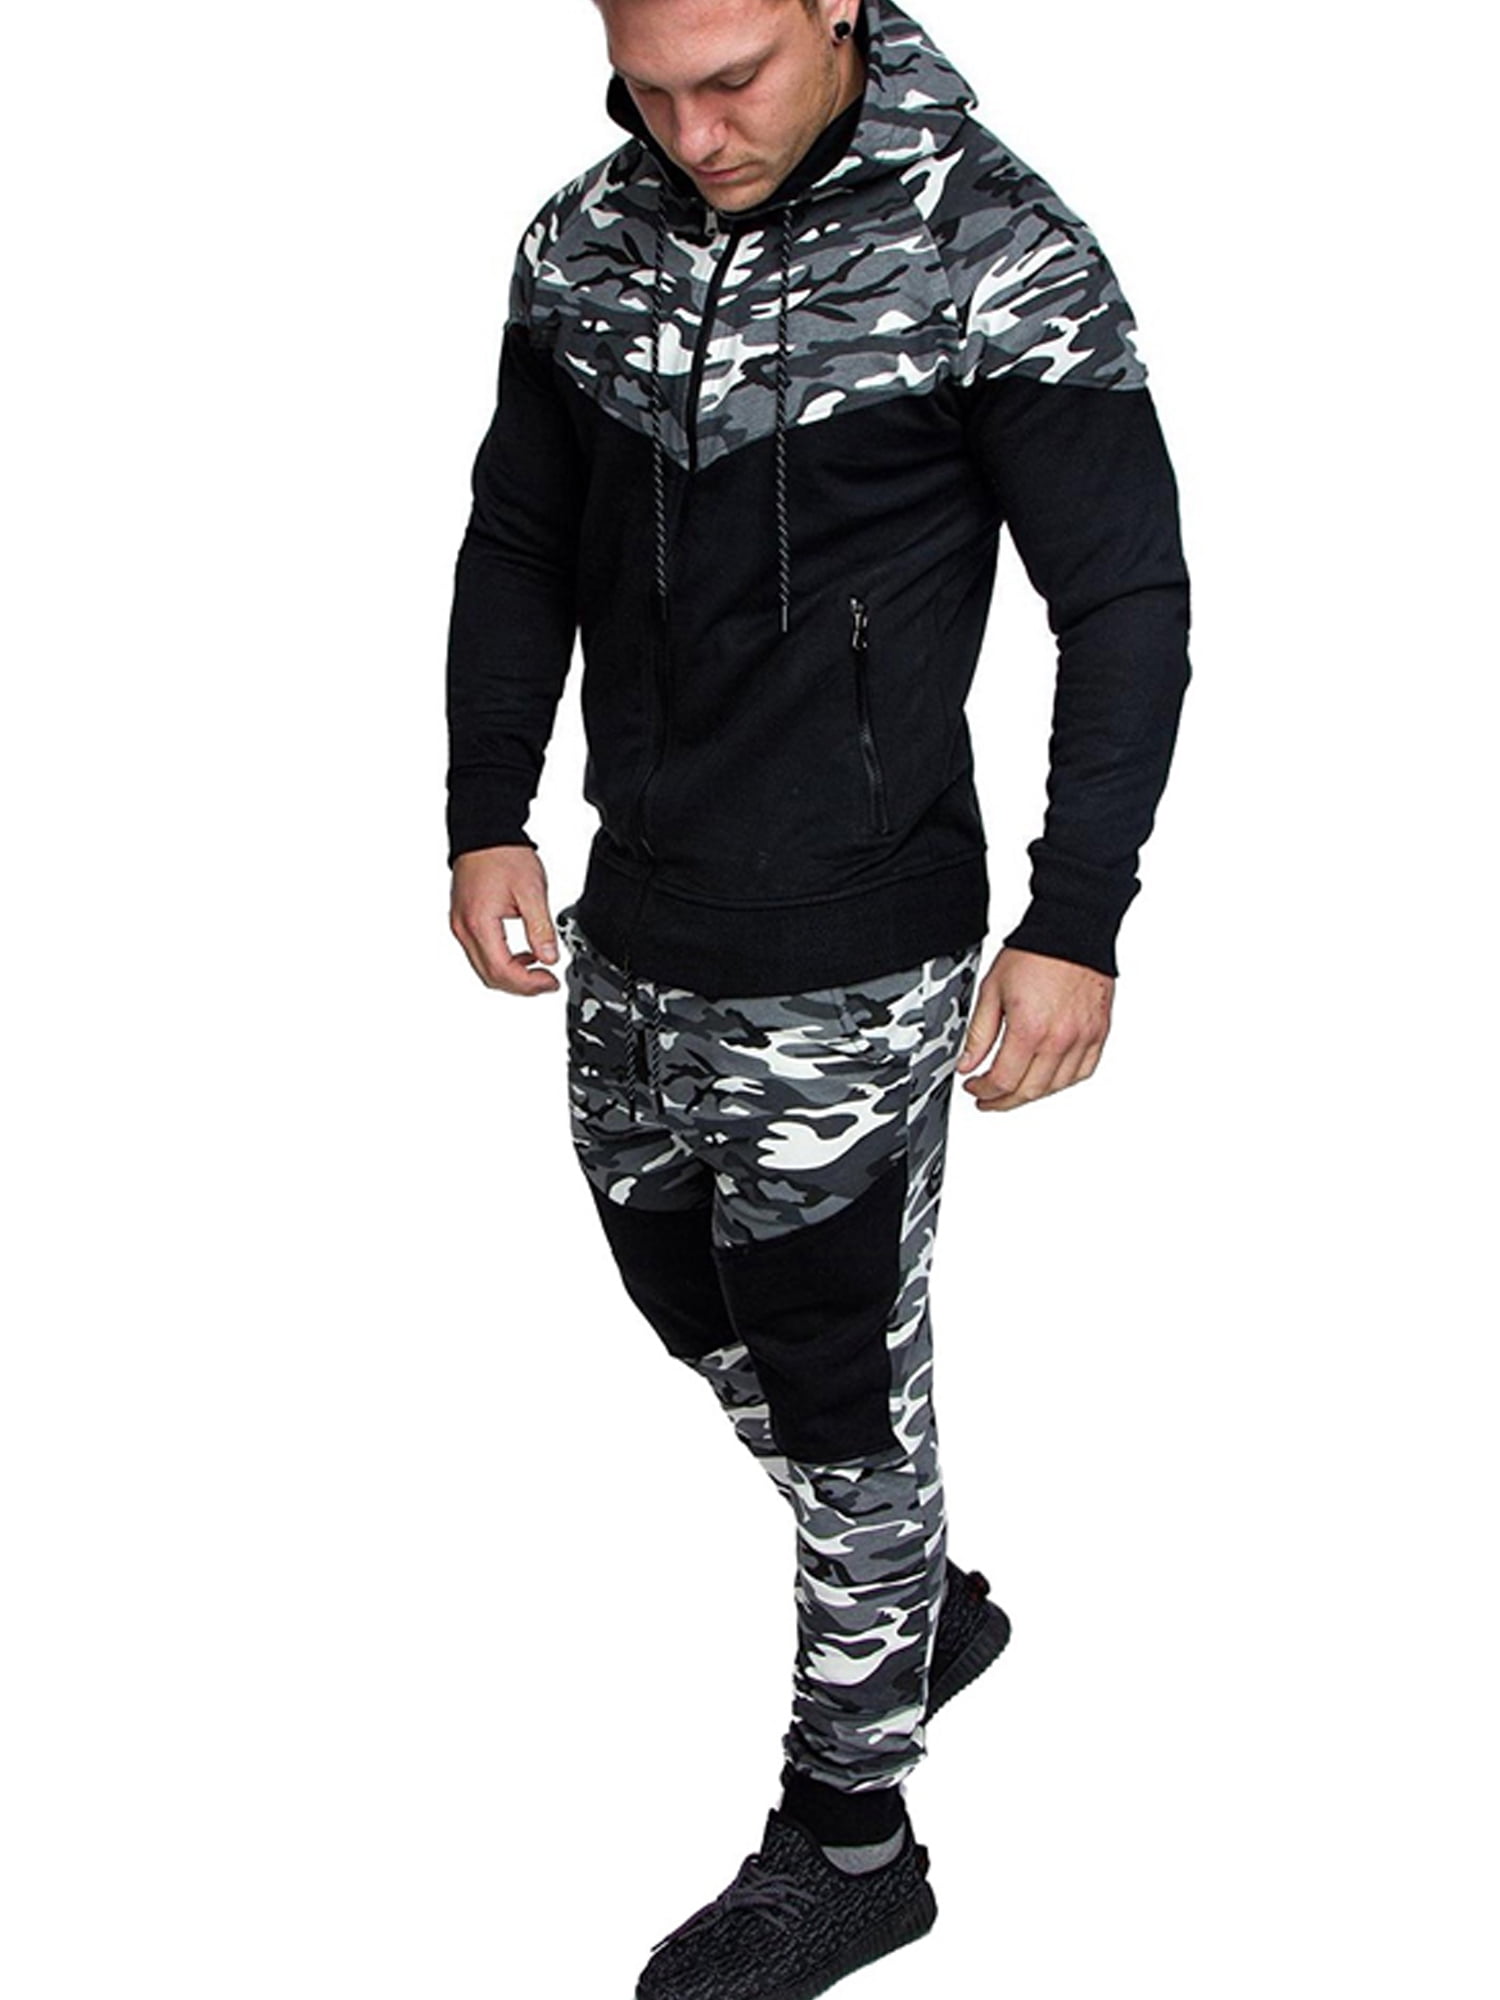 Enzo Mens Full Tracksuit Set Striped Pullover Hoodie Casual Hoody Top Fleece Joggers Gym Jogging Bottoms